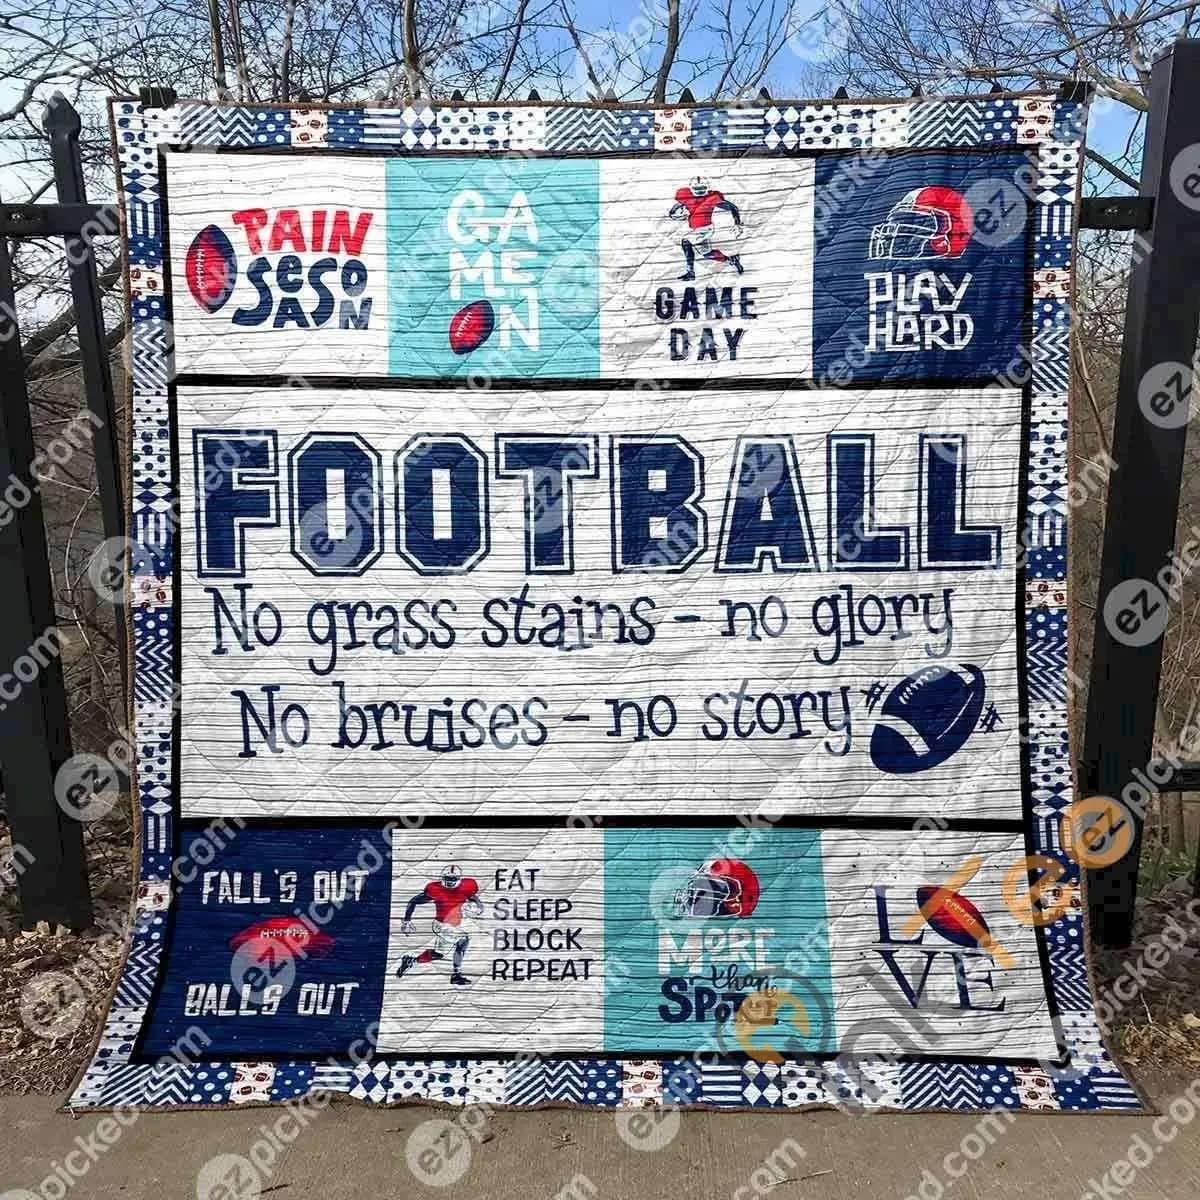 No Bruises No Story  Blanket Th2906 Quilt